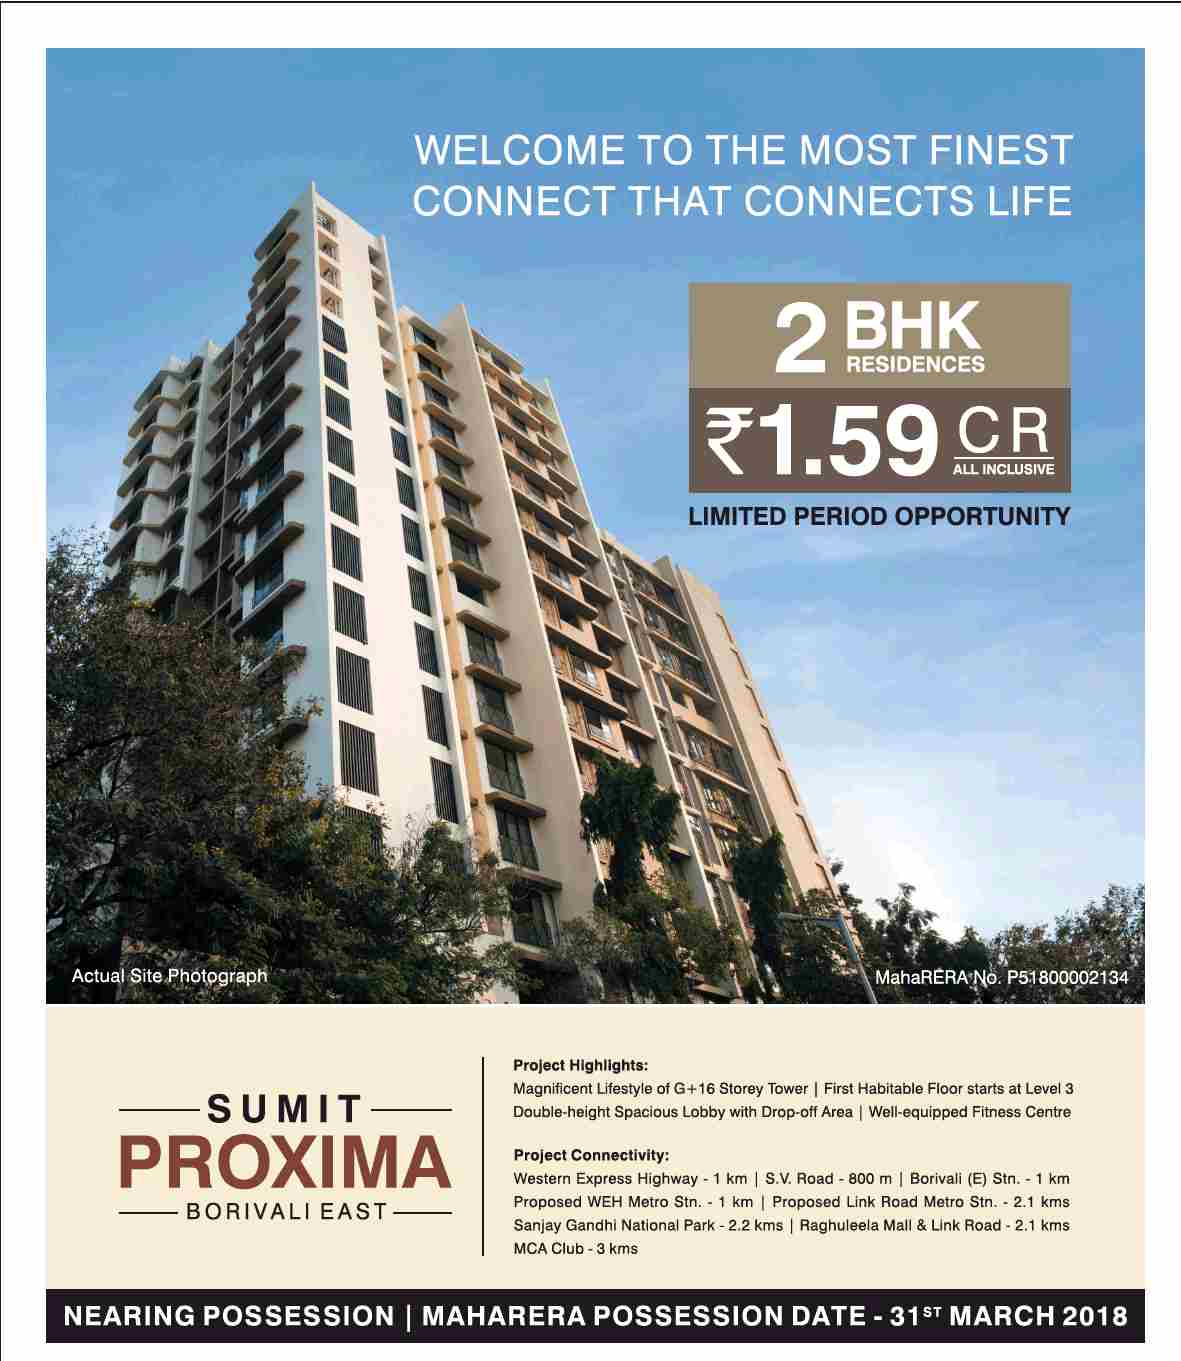 Welcome to the finest connect that connects life at Sumit Proxima in Mumbai